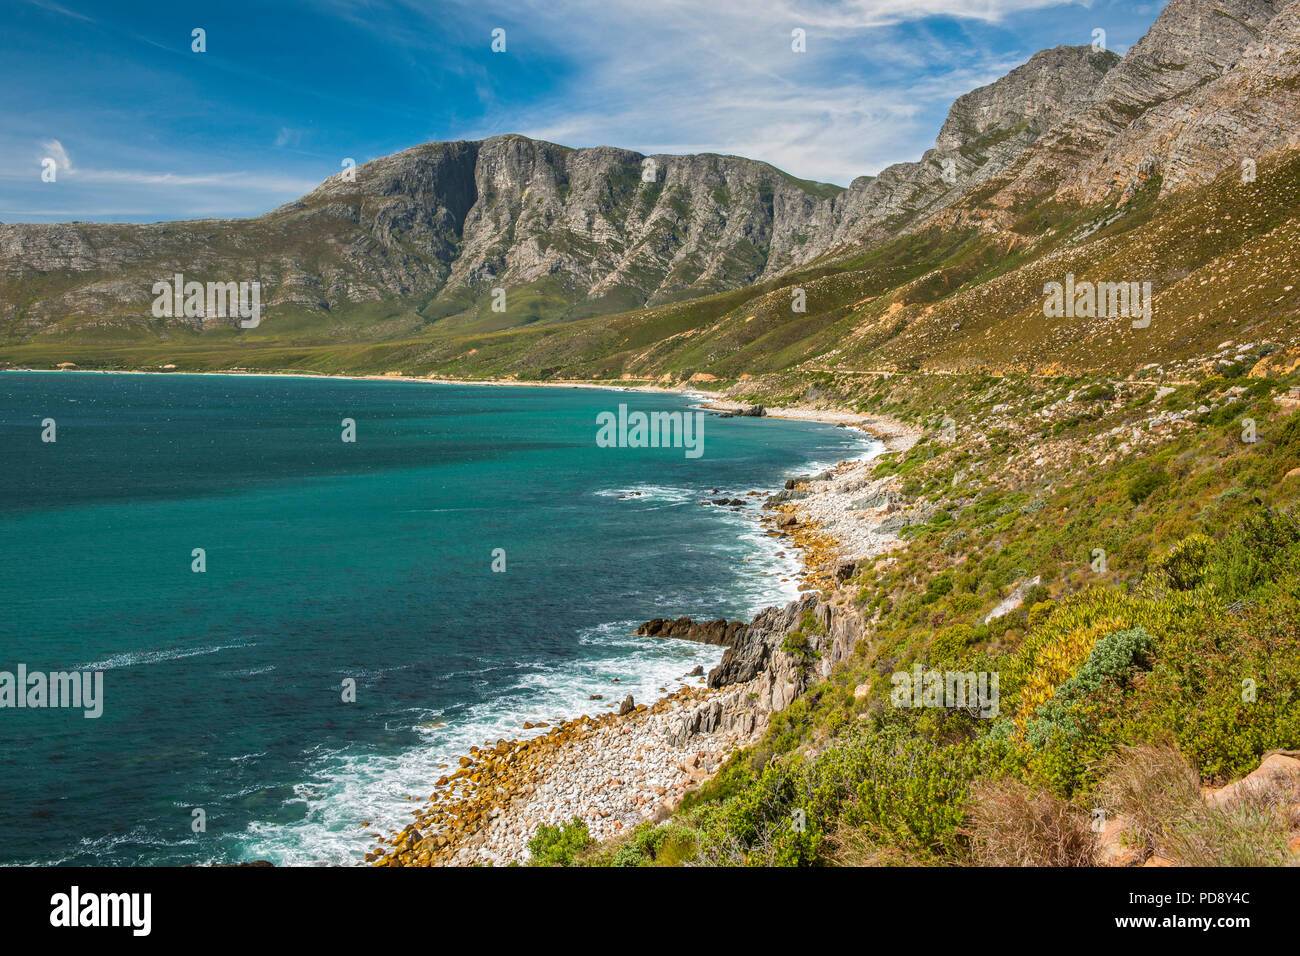 Coastal landscape of the Kogelberg Biosphere Reserve near Cape Town, South Africa. Stock Photo